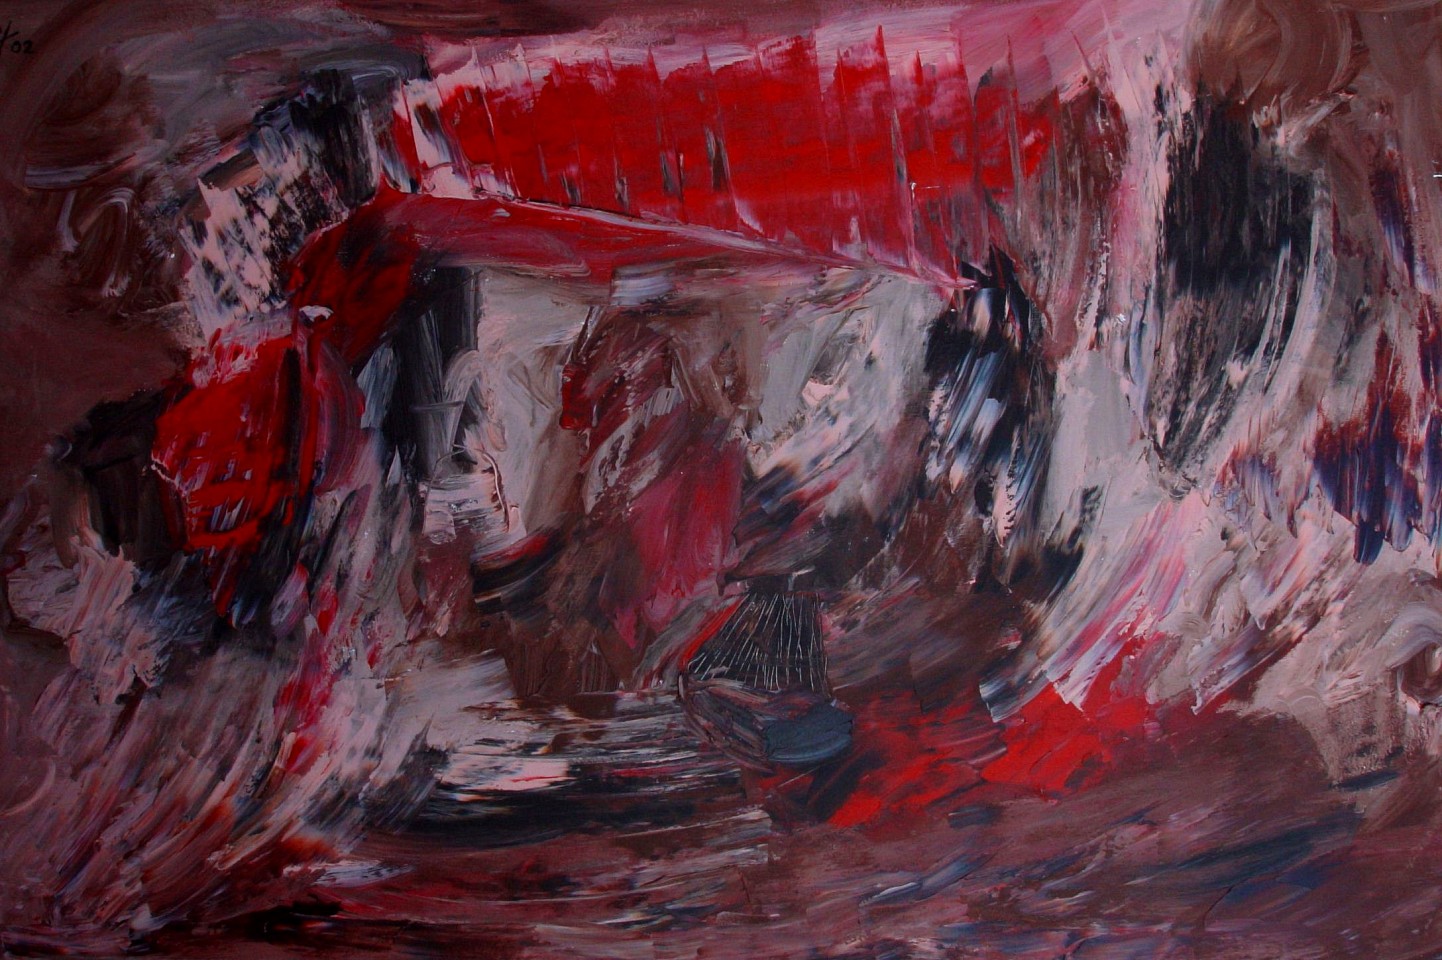 Diego Jacobson, Primordial Psychology, 2002
Acrylic on Canvas, 48 x 72 in. (121.9 x 182.9 cm)
0307